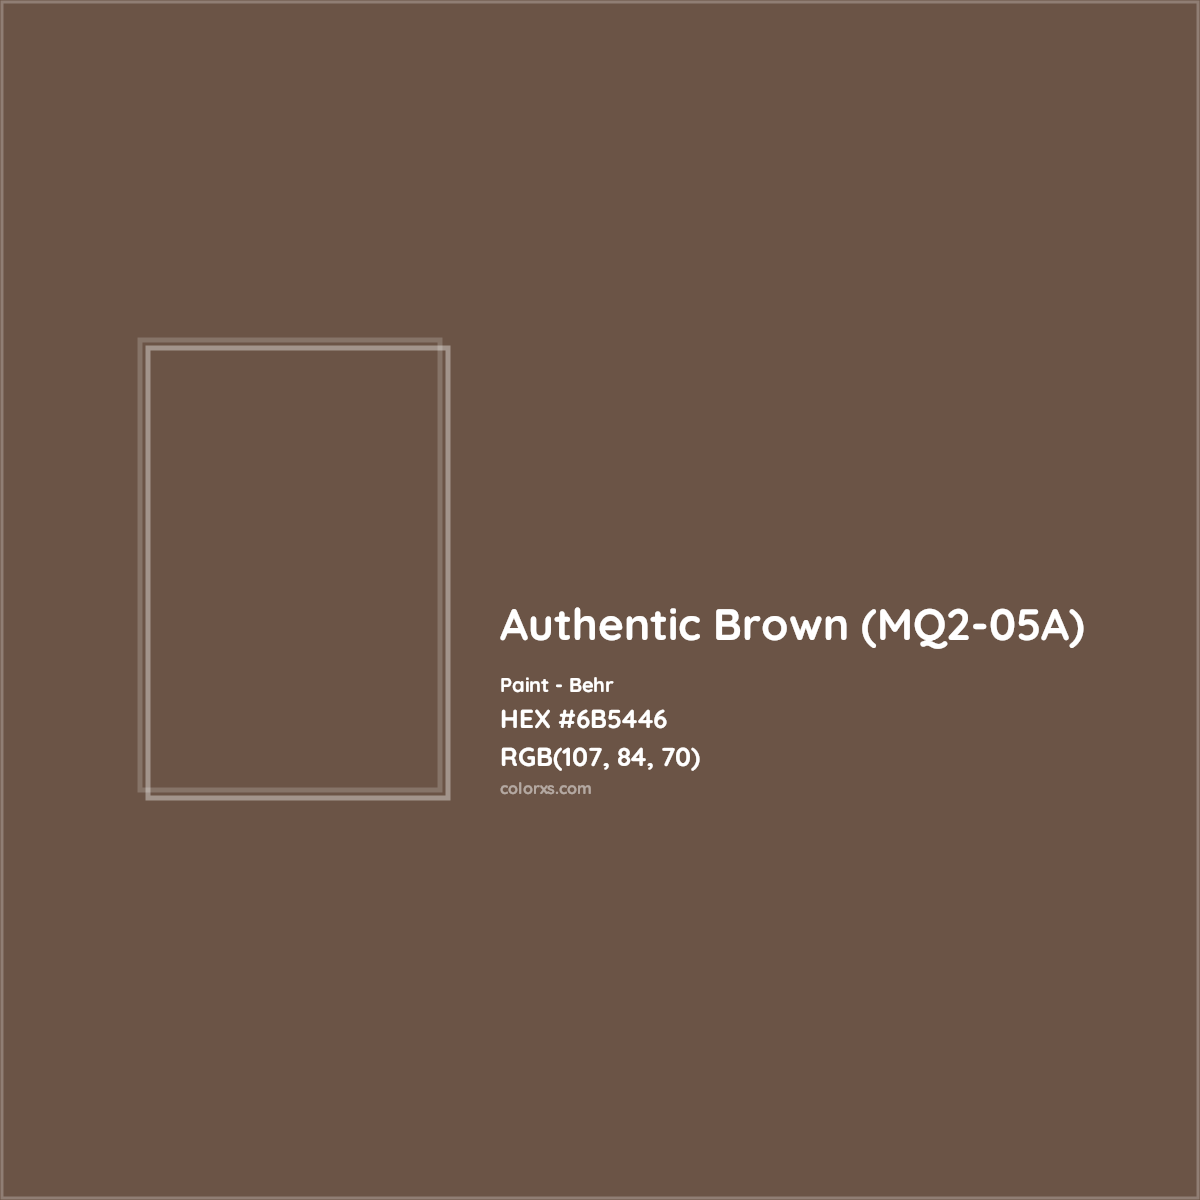 HEX #6B5446 Authentic Brown (MQ2-05A) Paint Behr - Color Code